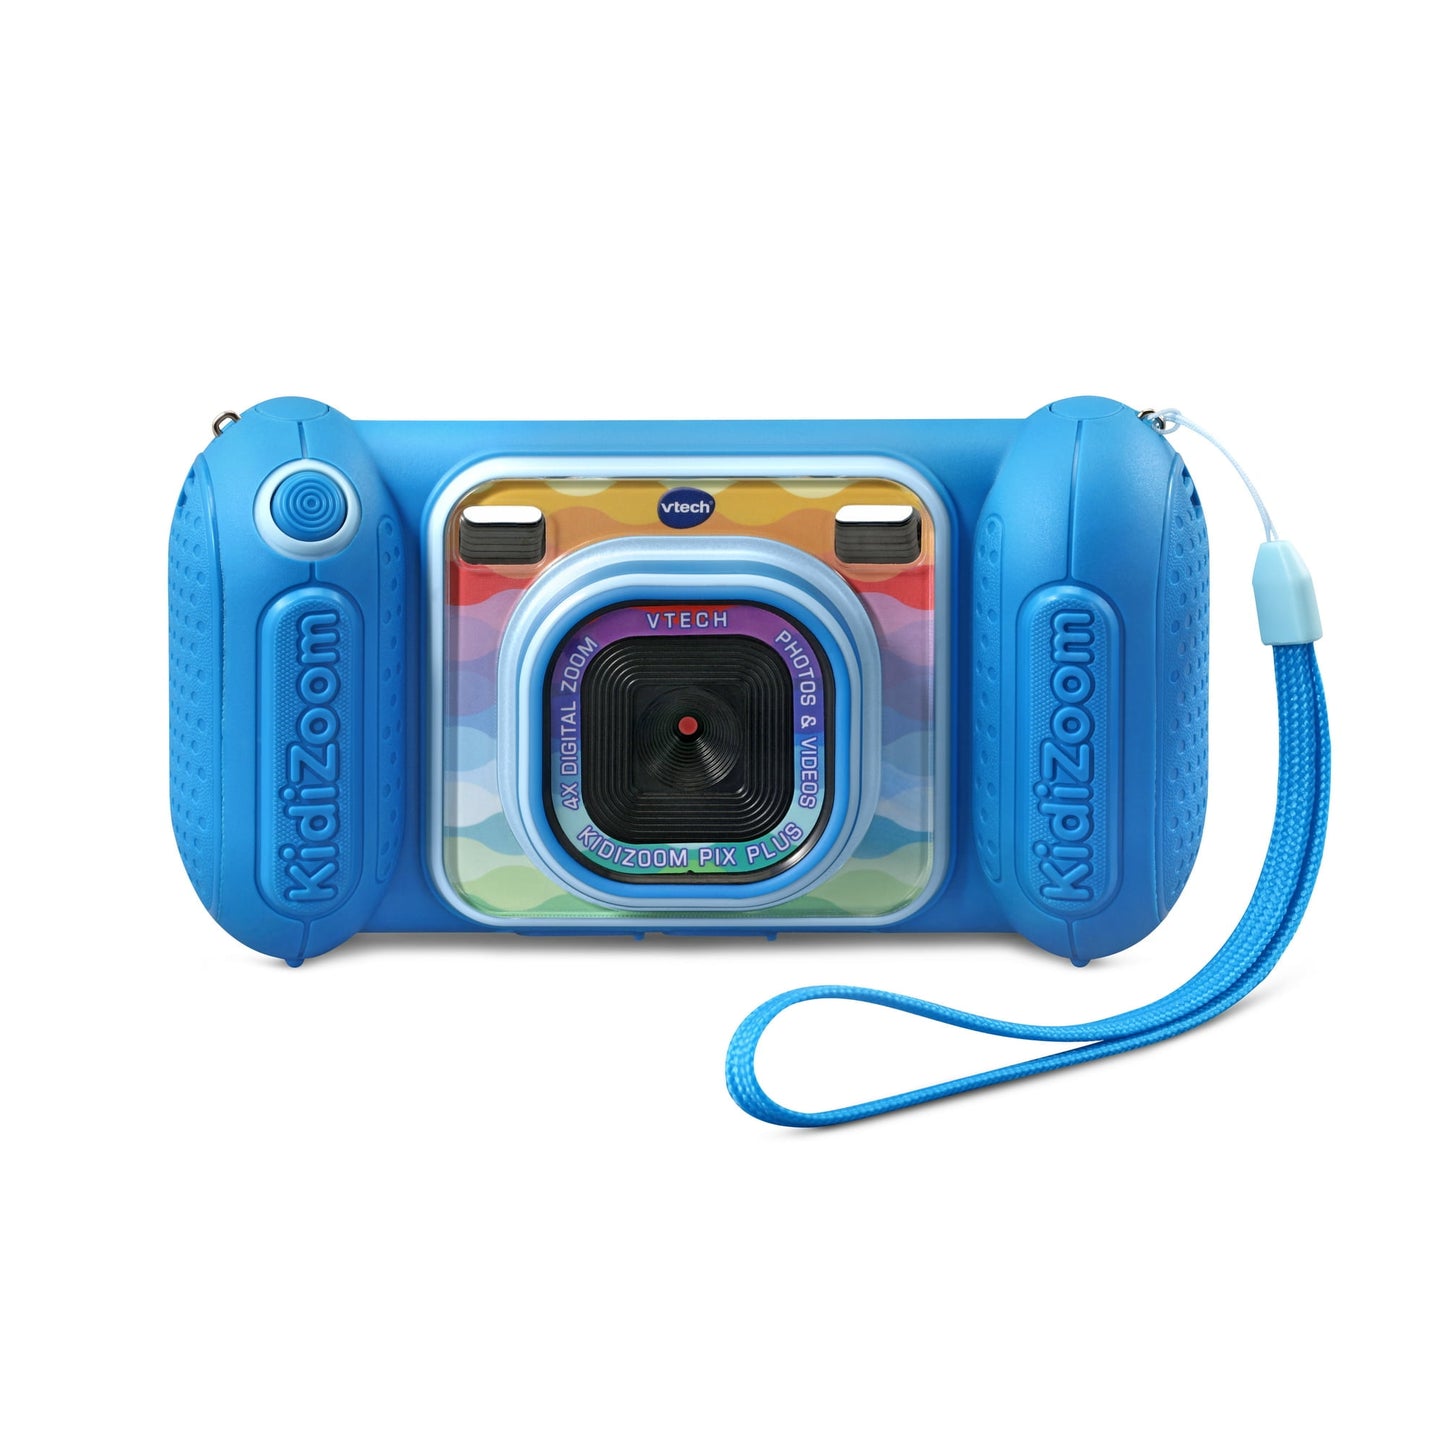 VTech KidiZoom Camera Pix Plus 4X Digital Zoom with Panoramic and Talking Photos, Blue